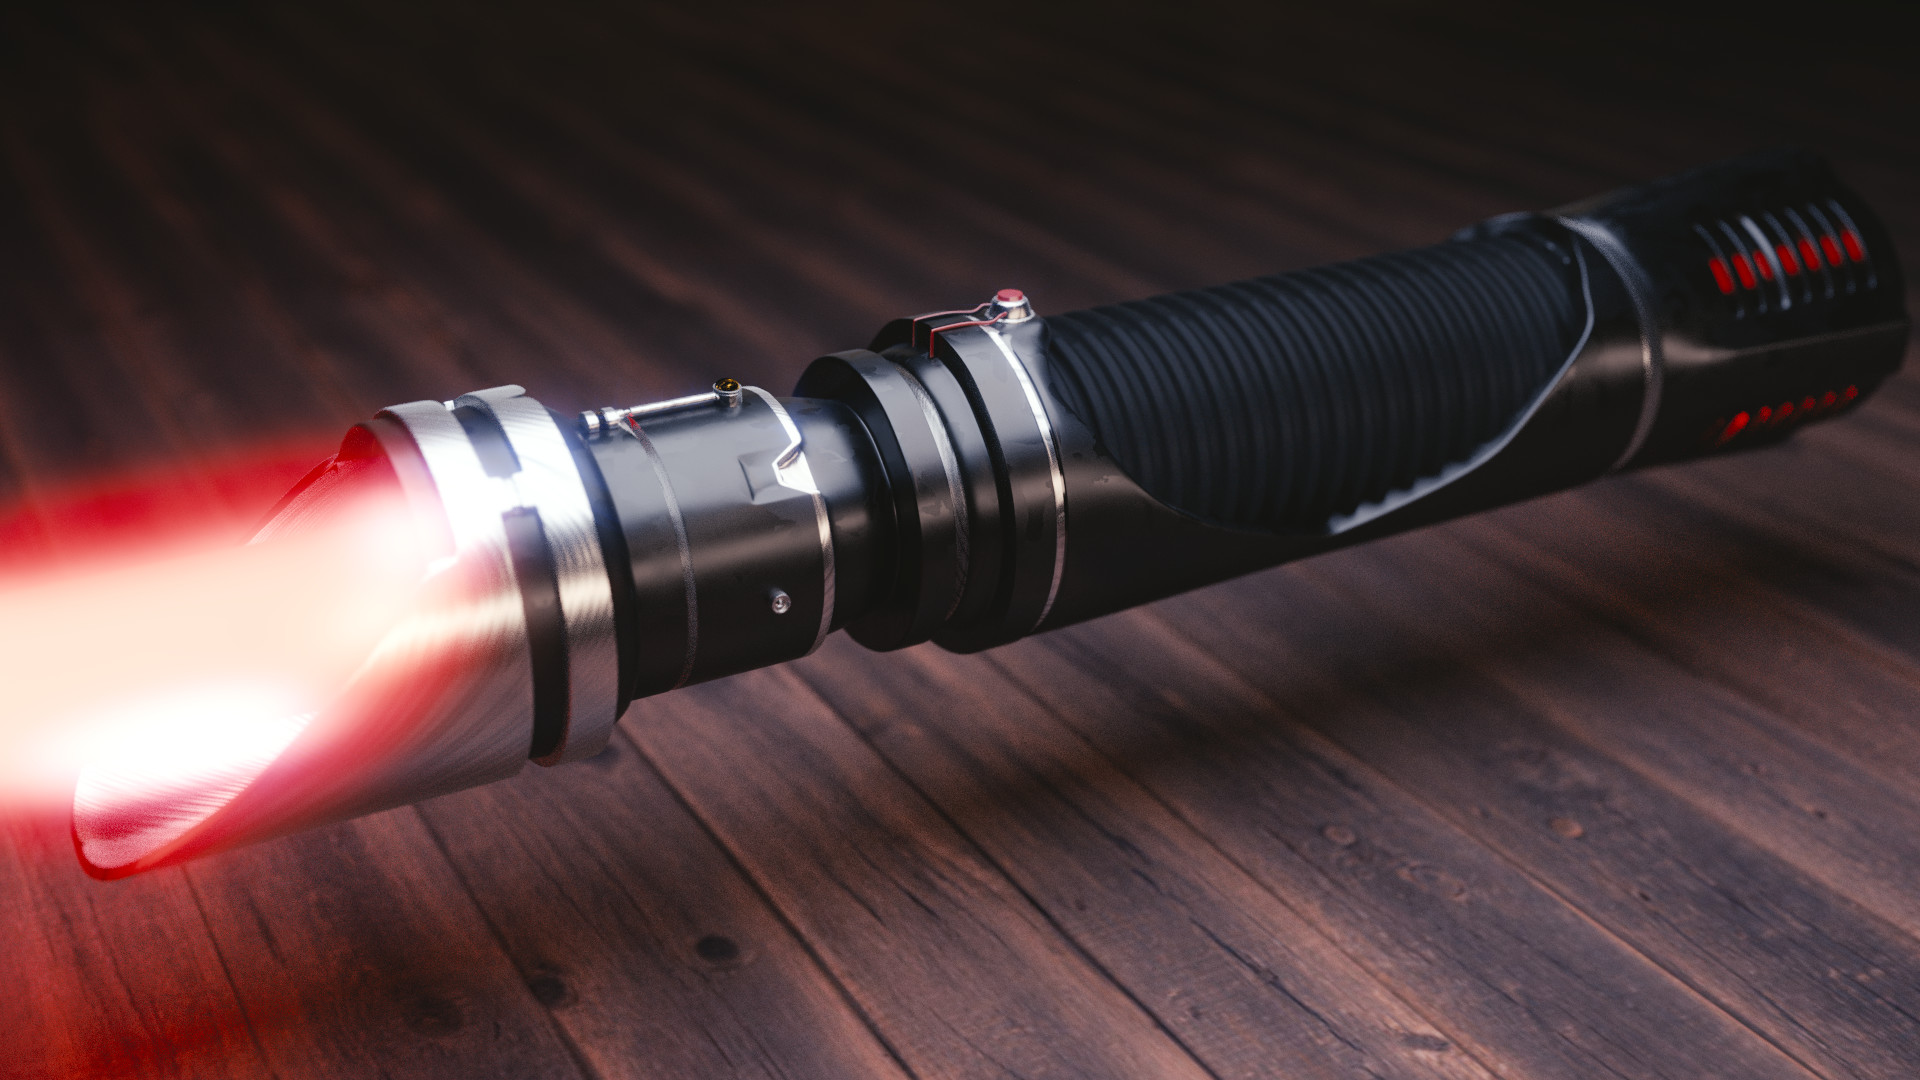 Made a lightsaber wallpaper, let me know how you folks like it.